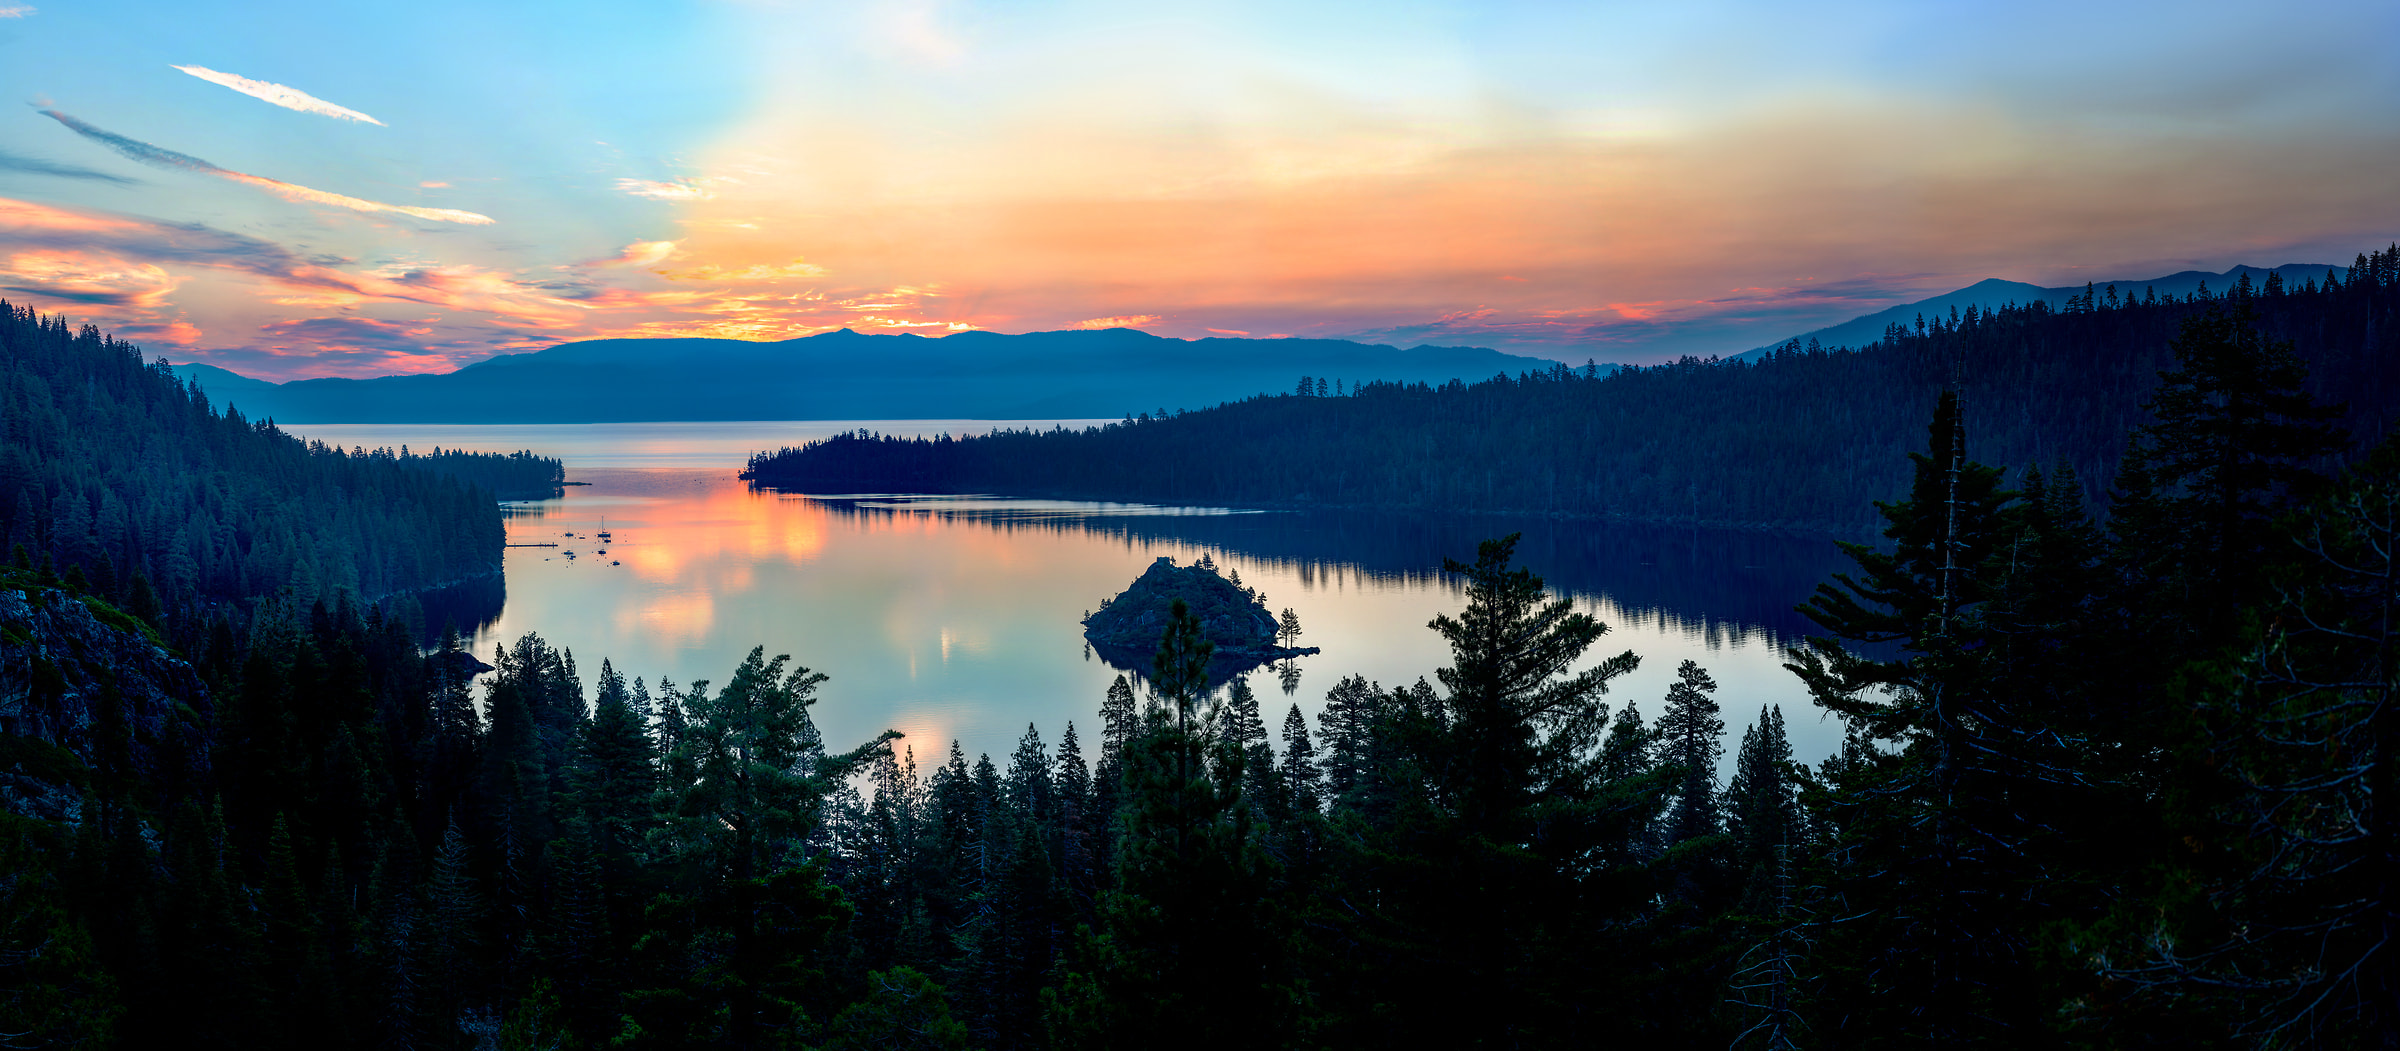 896 megapixels! A very high resolution, large-format VAST photo print of a lake; landscape photograph created by Justin Katz in Emerald Bay, Lake Tahoe, California.